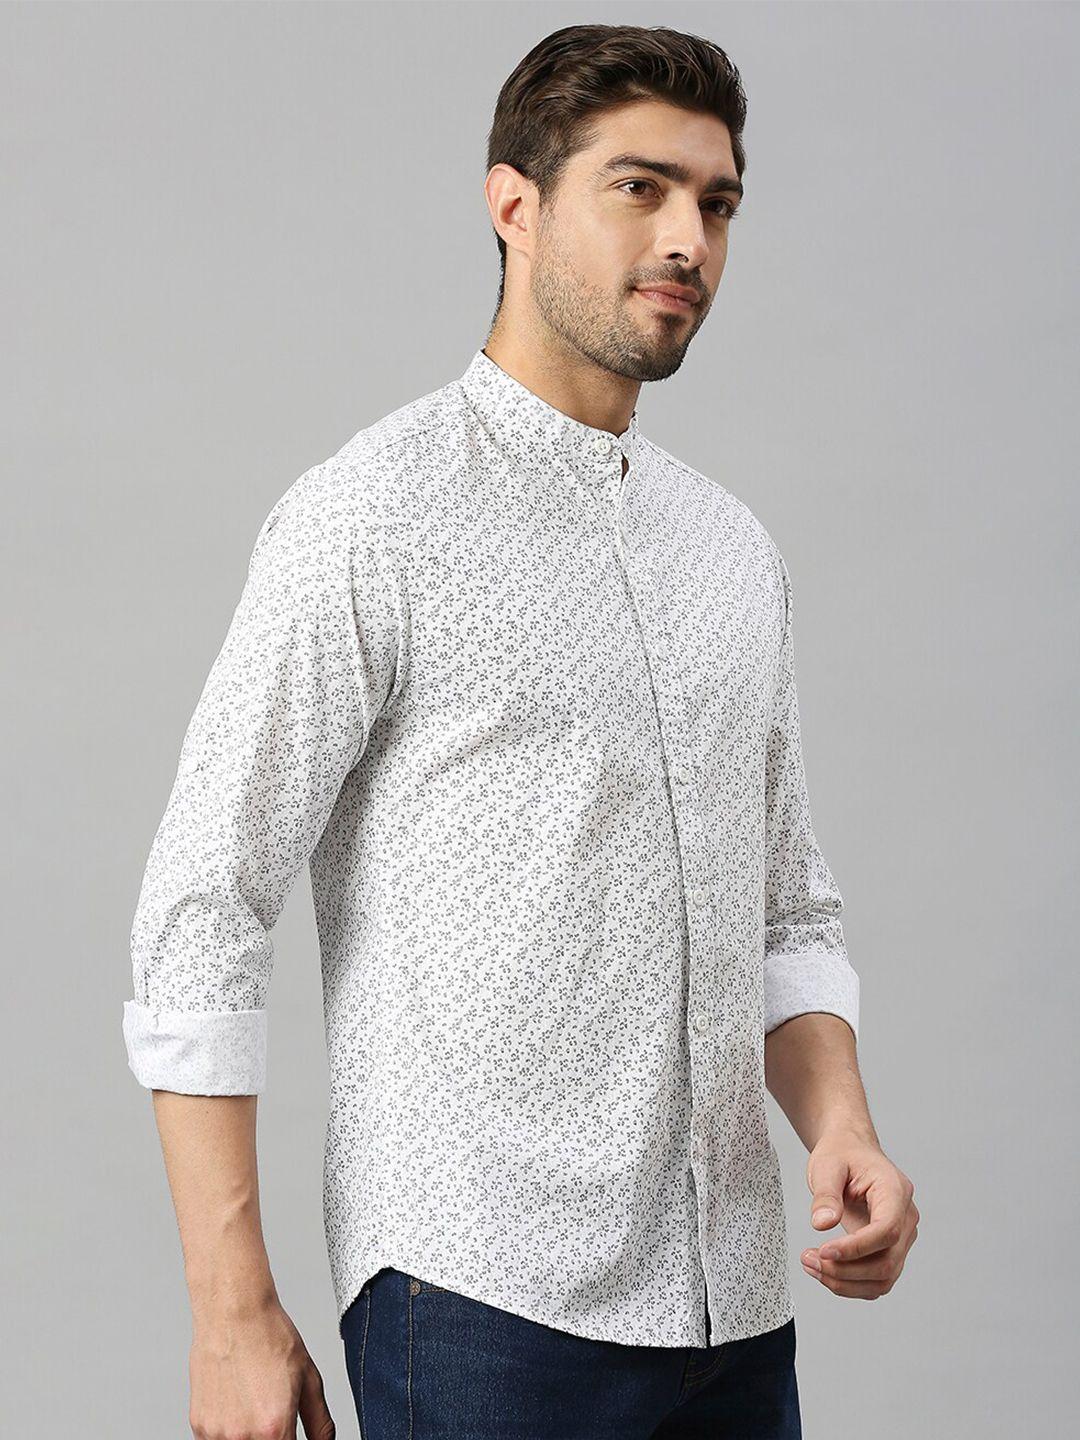 here&now white classic slim fit abstract printed pure cotton casual shirt